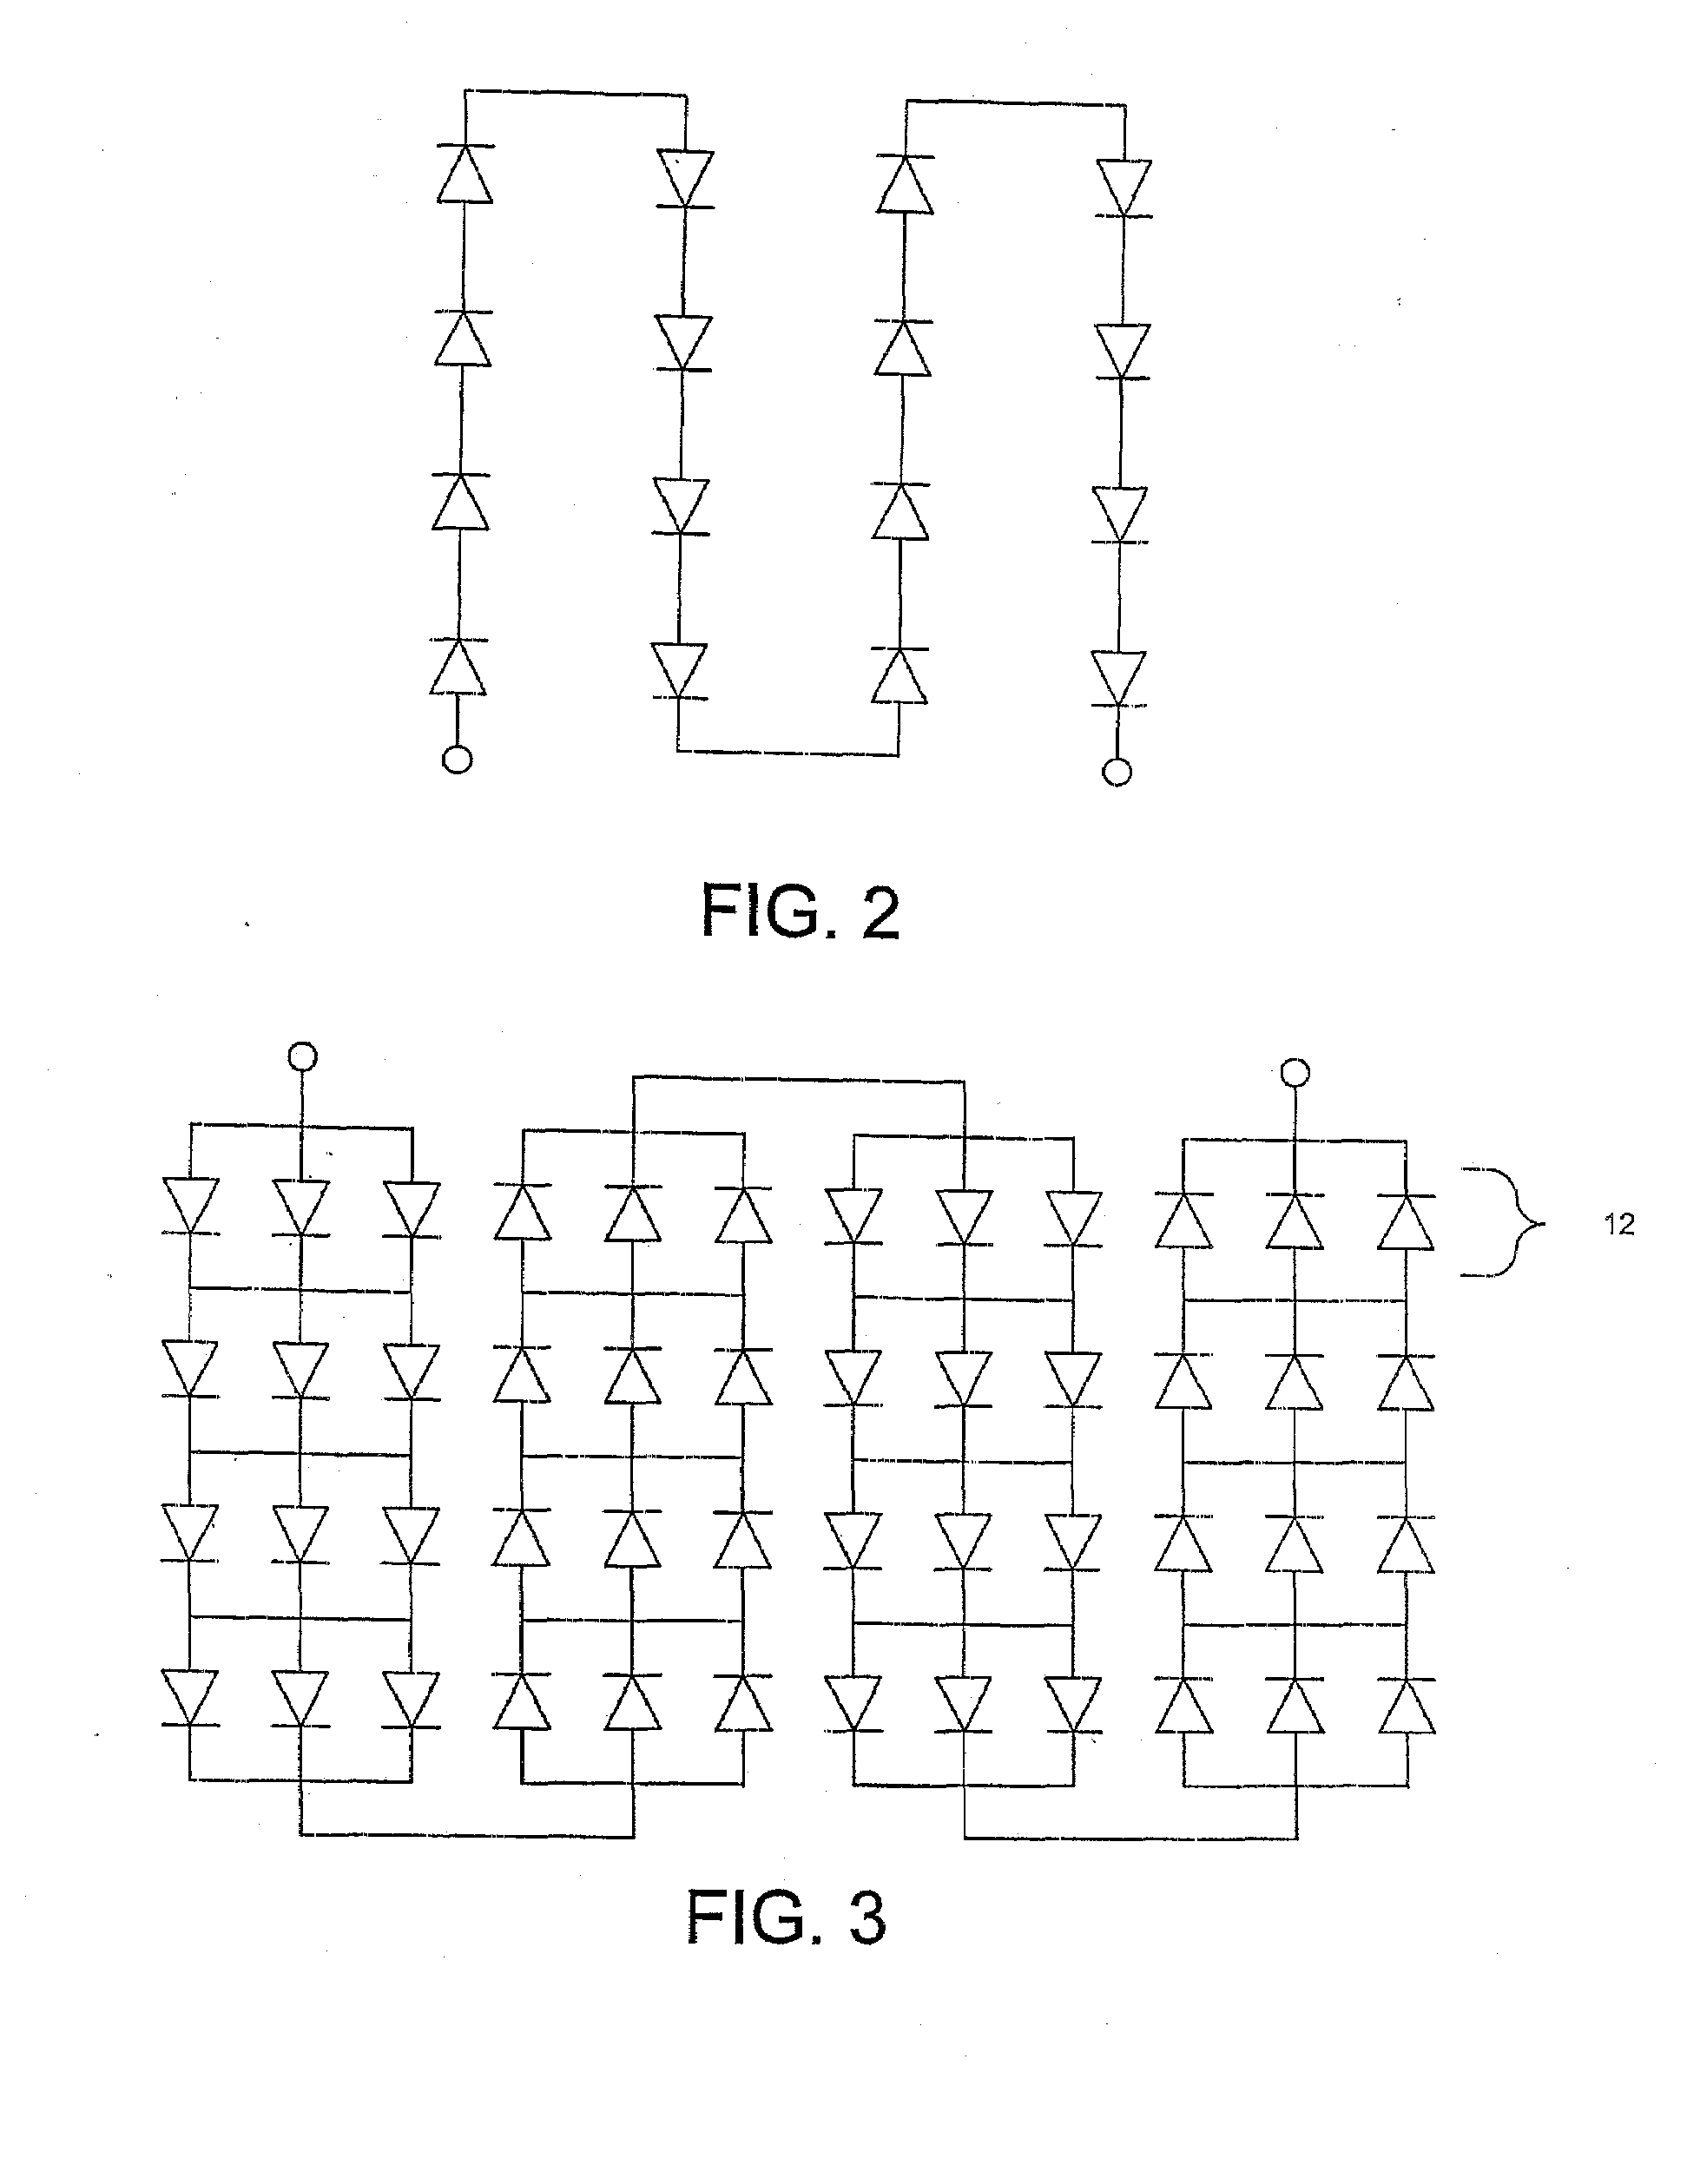 Fault tolerant light emitters, systems incorporating fault tolerant light emitters and methods of fabricating fault tolerant light emitters